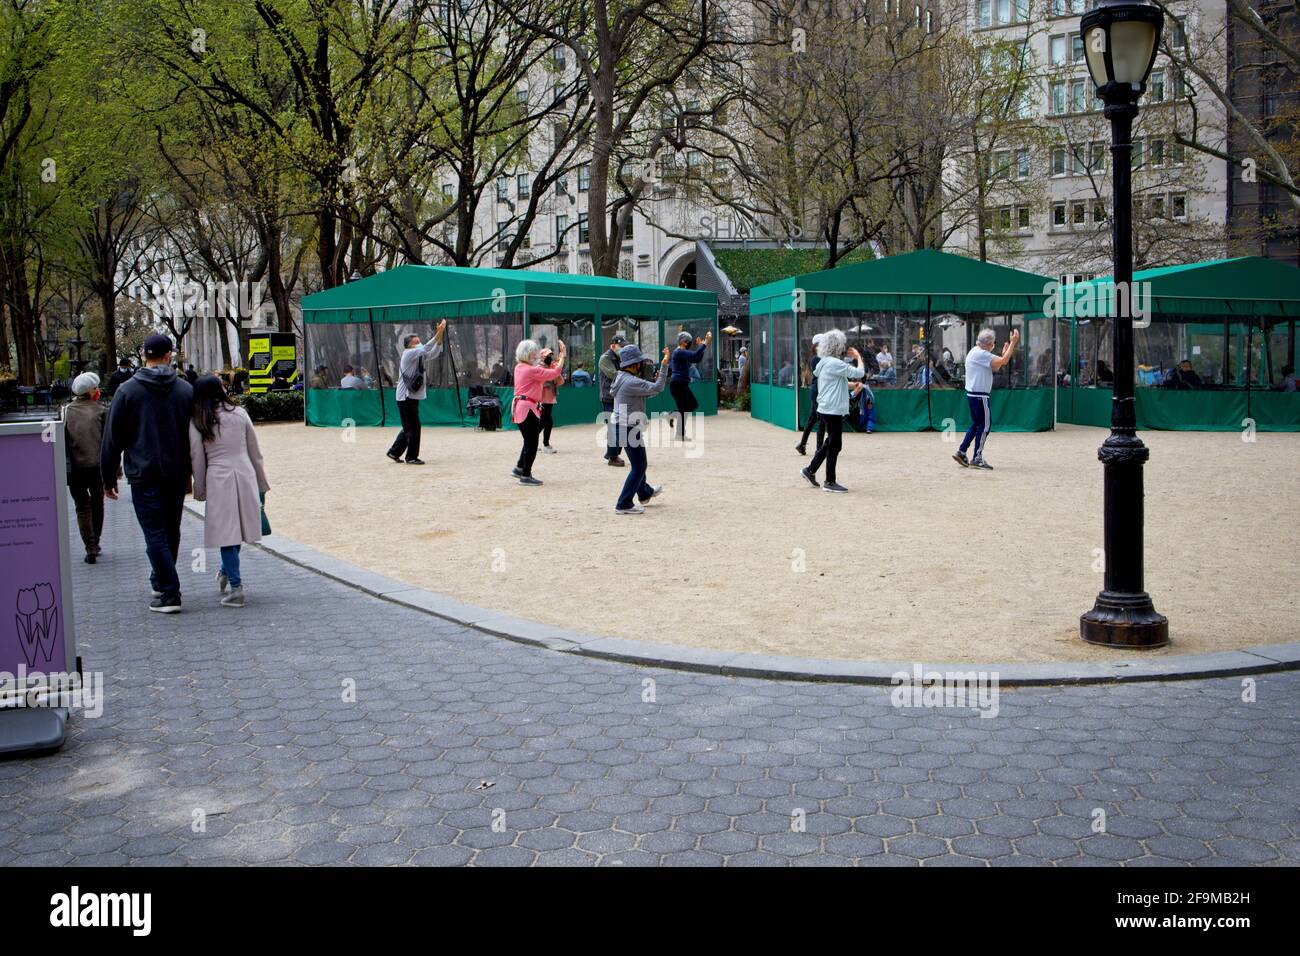 New York, NY, USA - Apr 19, 2021: Outdoor classroom doing exercises in Madison Square Park Stock Photo